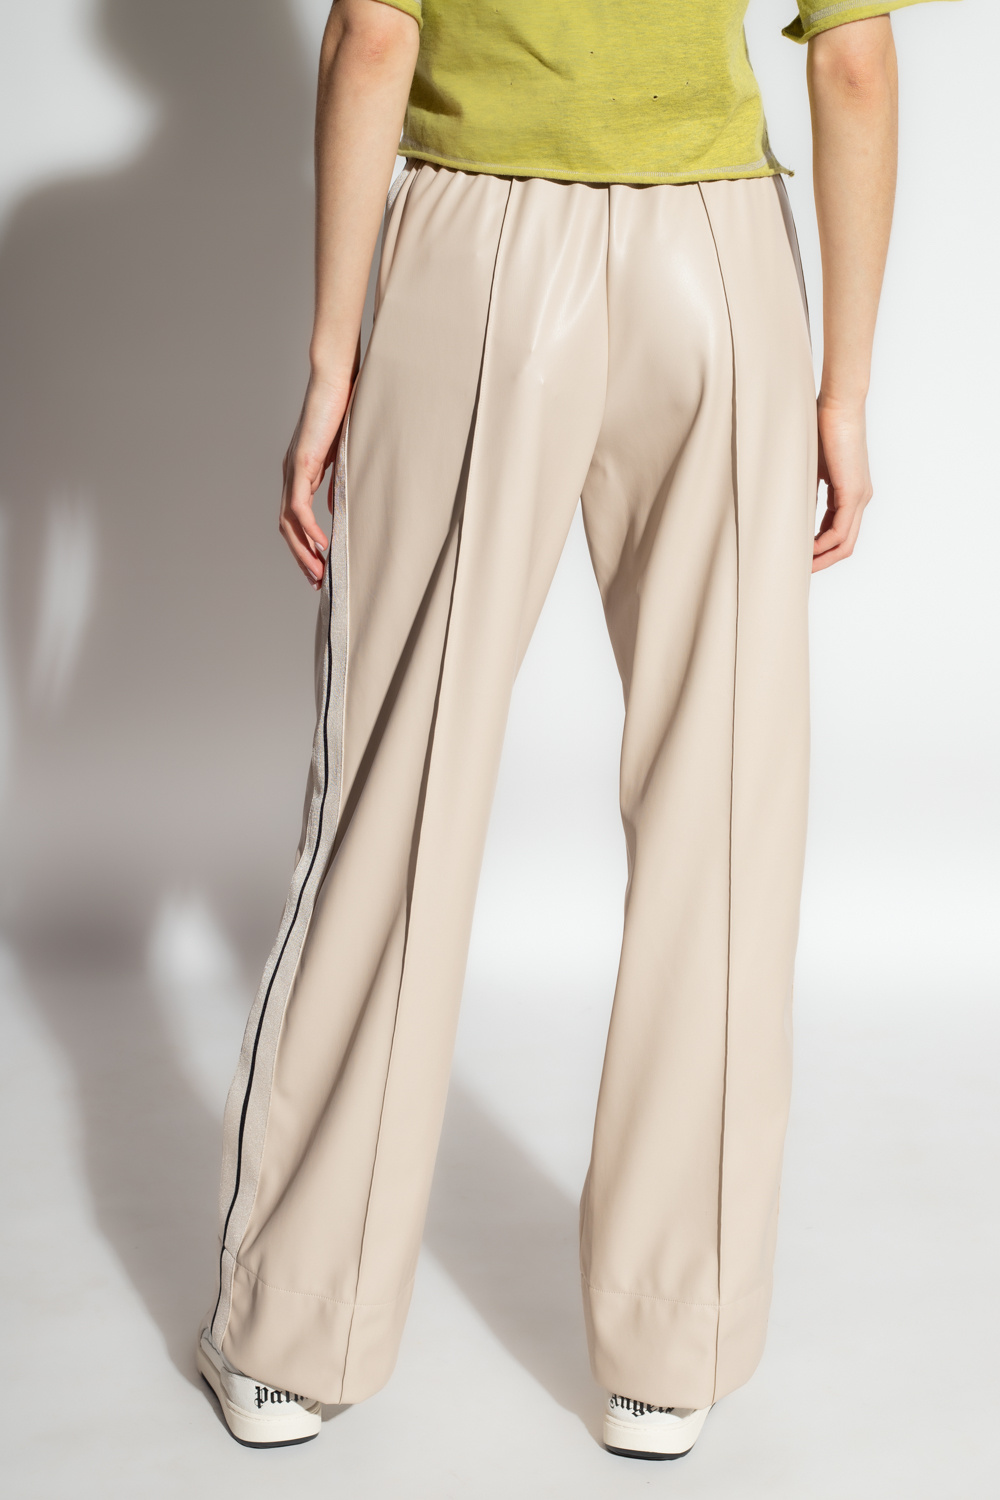 Palm Angels pucci trousers with logo